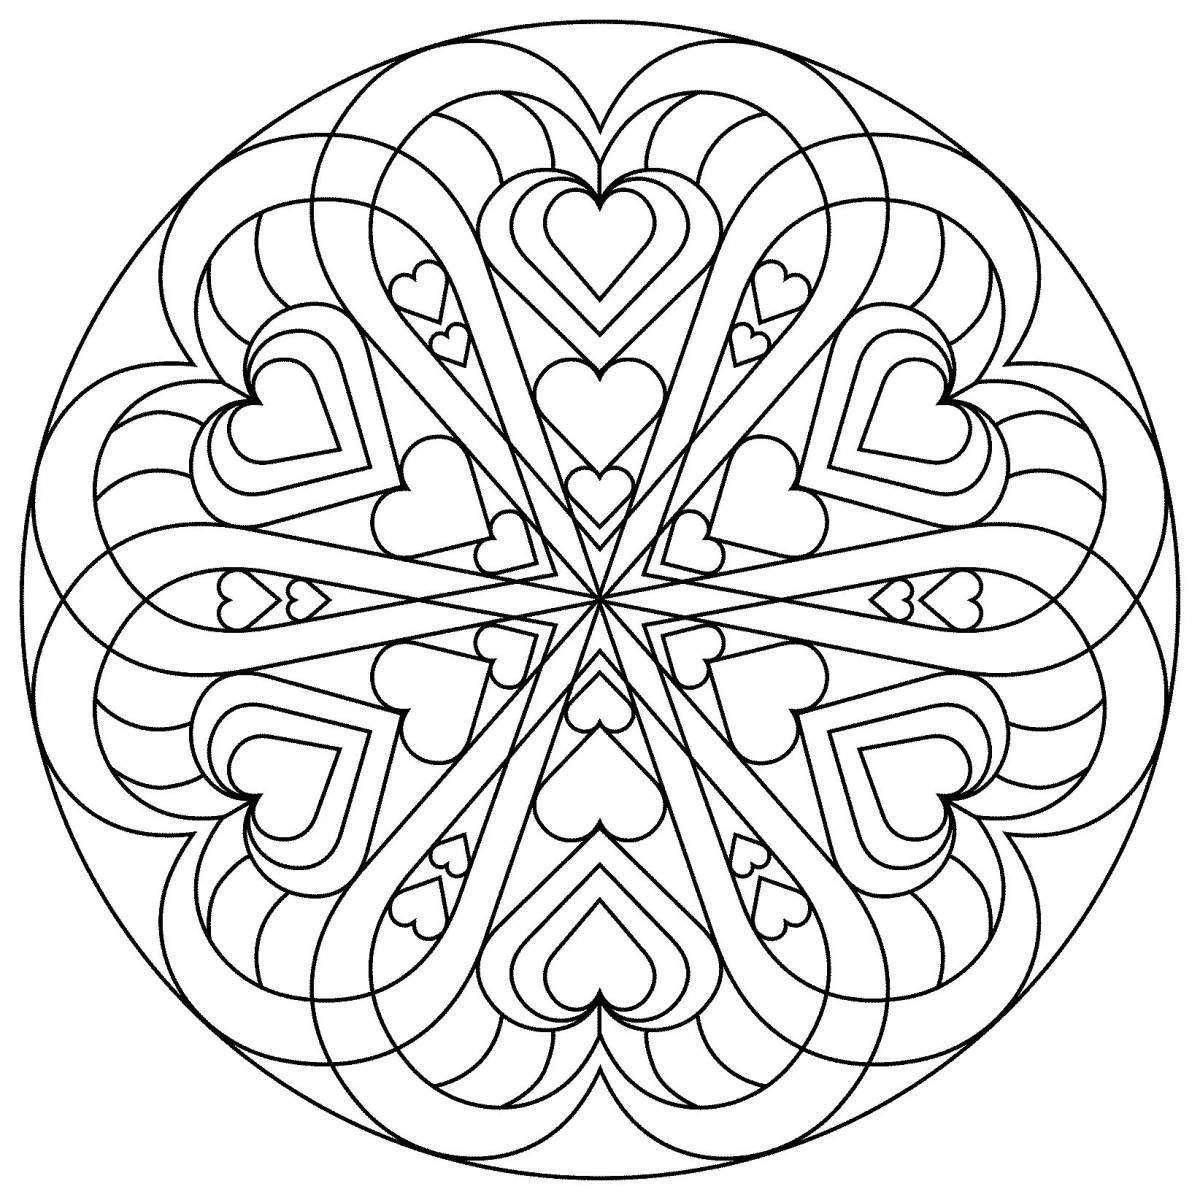 Exquisite mantra coloring pages